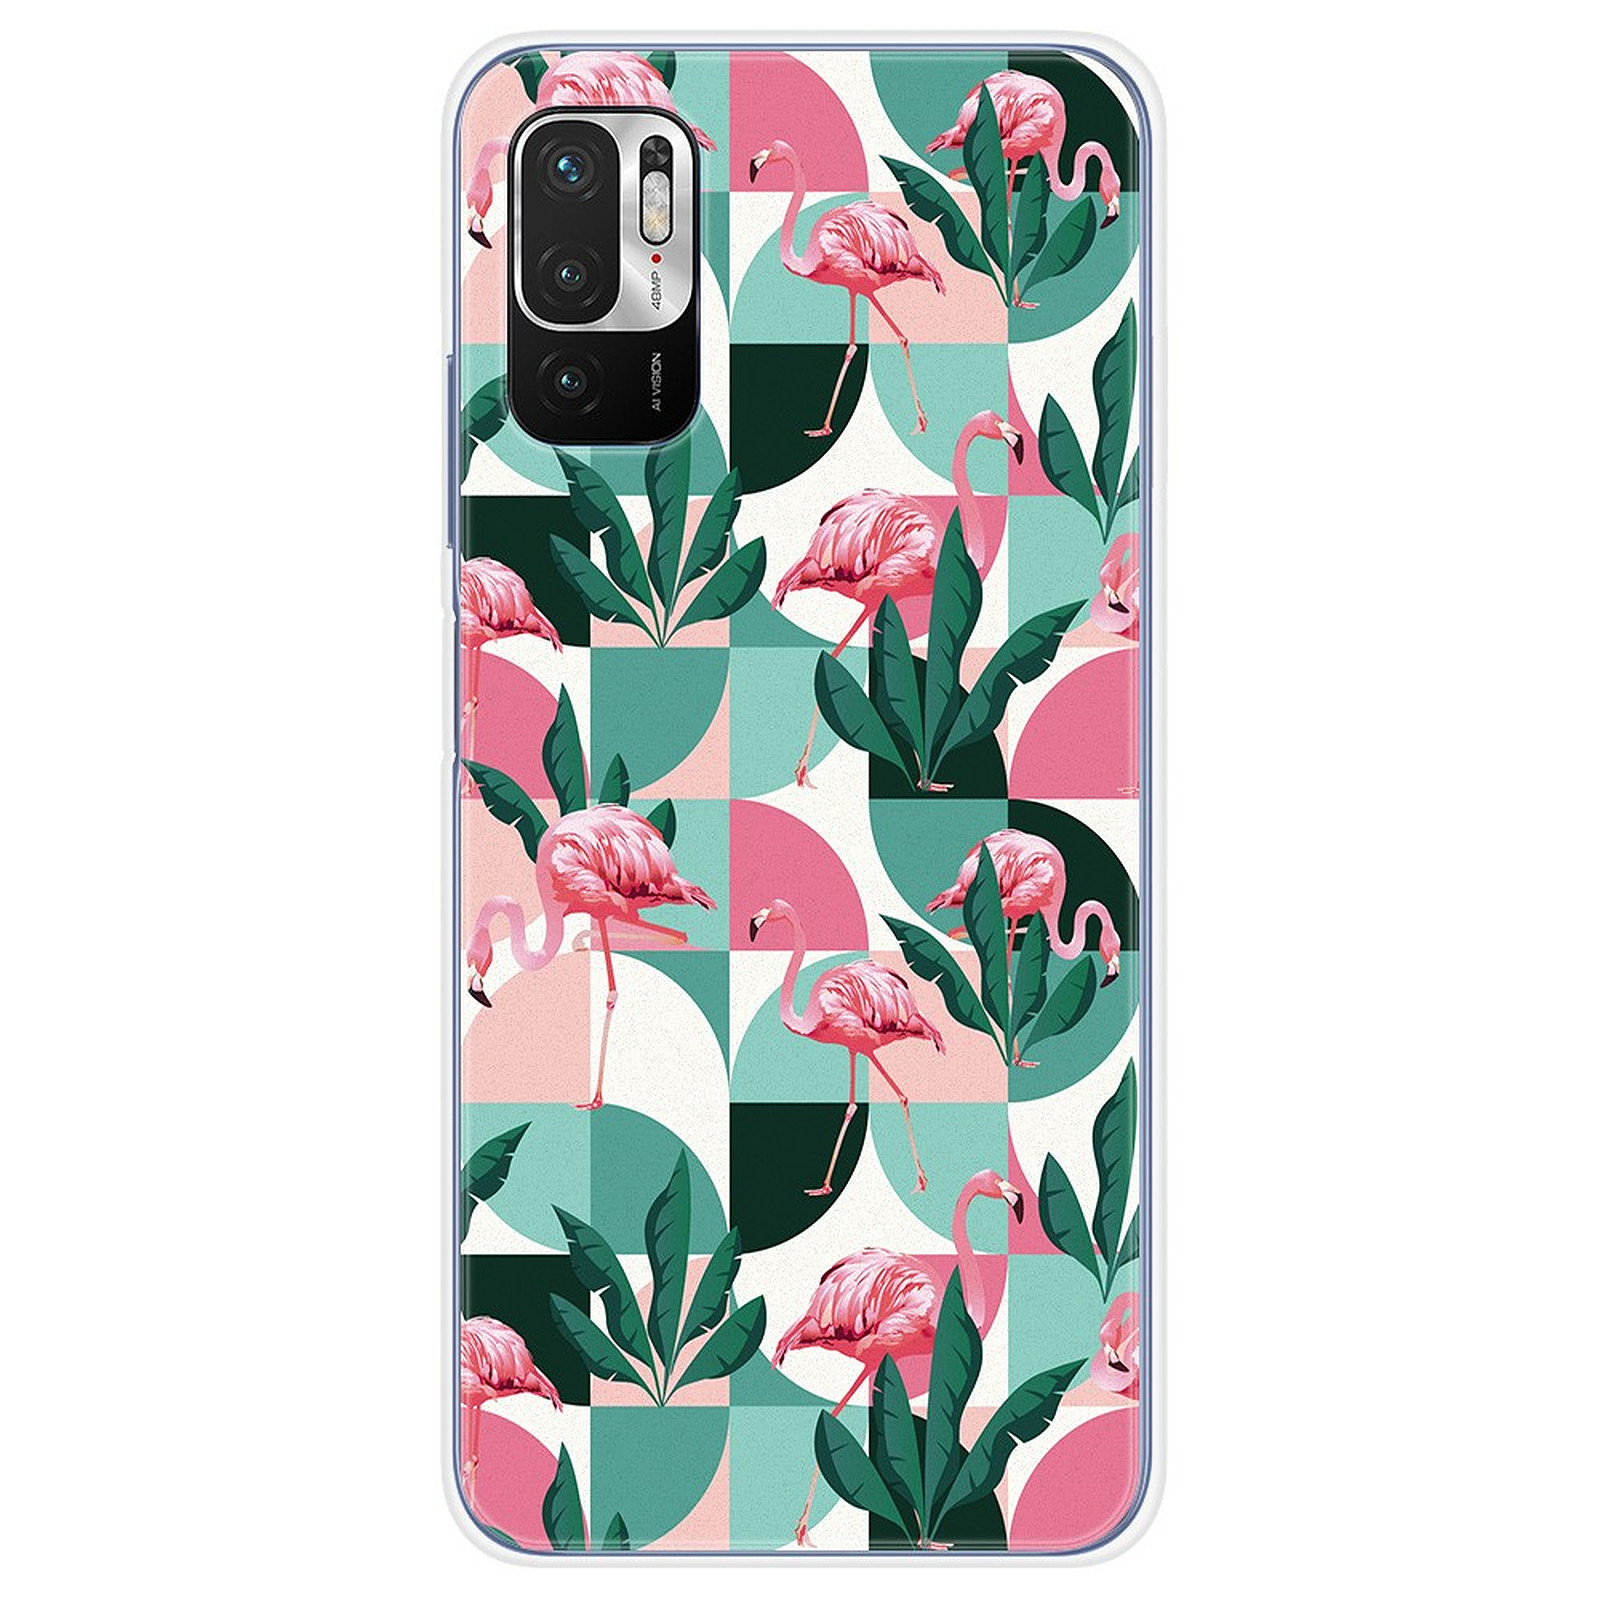 1001 Coques Coque silicone gel compatible Xiaomi Redmi Note 10 5G motif Flamants Roses ge´ome´trique - Coque telephone 1001Coques